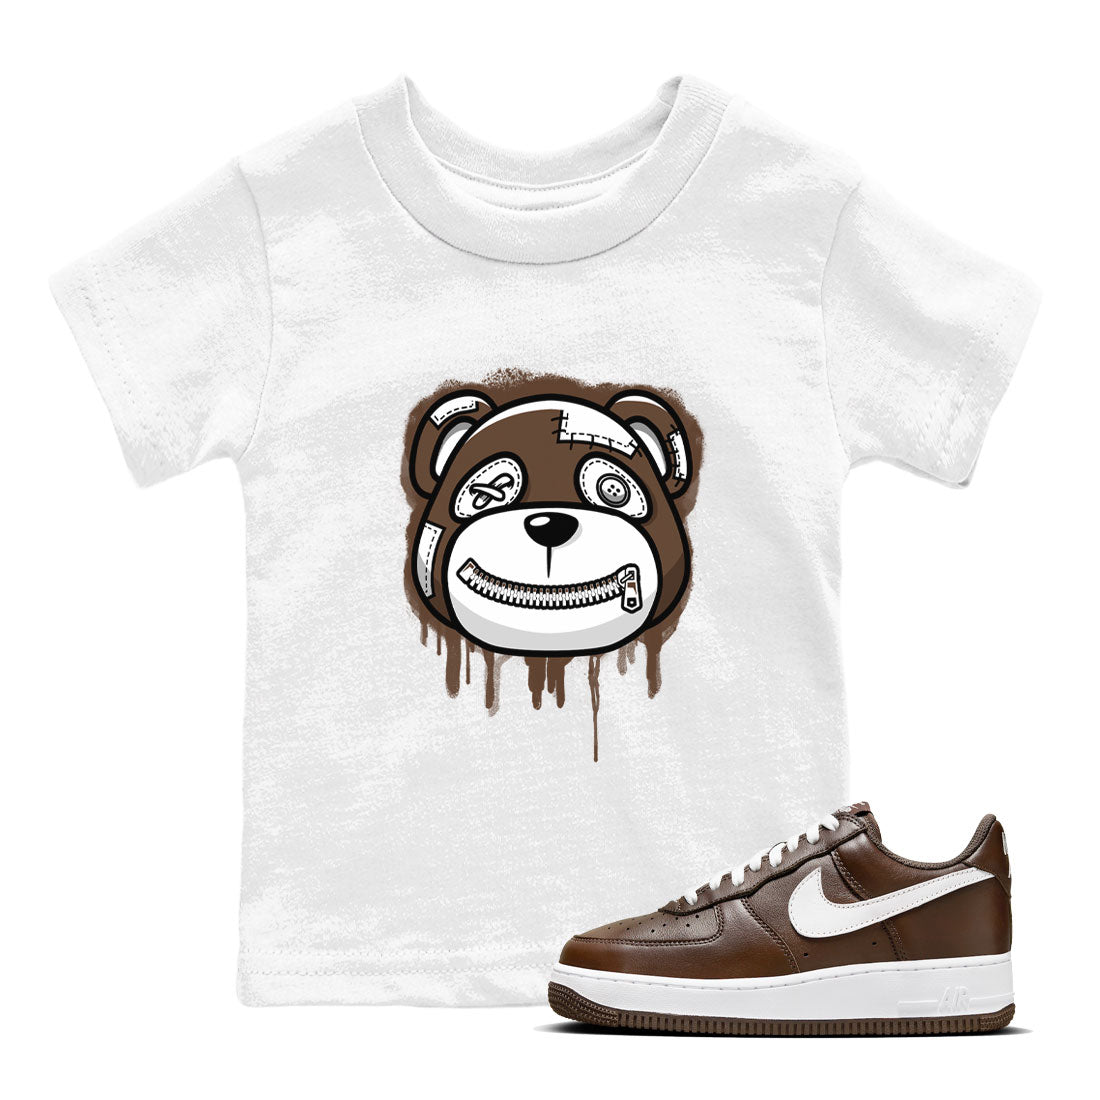 AF1 Chocolate shirt to match jordans Bear Face sneaker tees Air Force 1 Chocolate SNRT Sneaker Tees Youth Kid's Baby Shirt White 1 T-Shirt